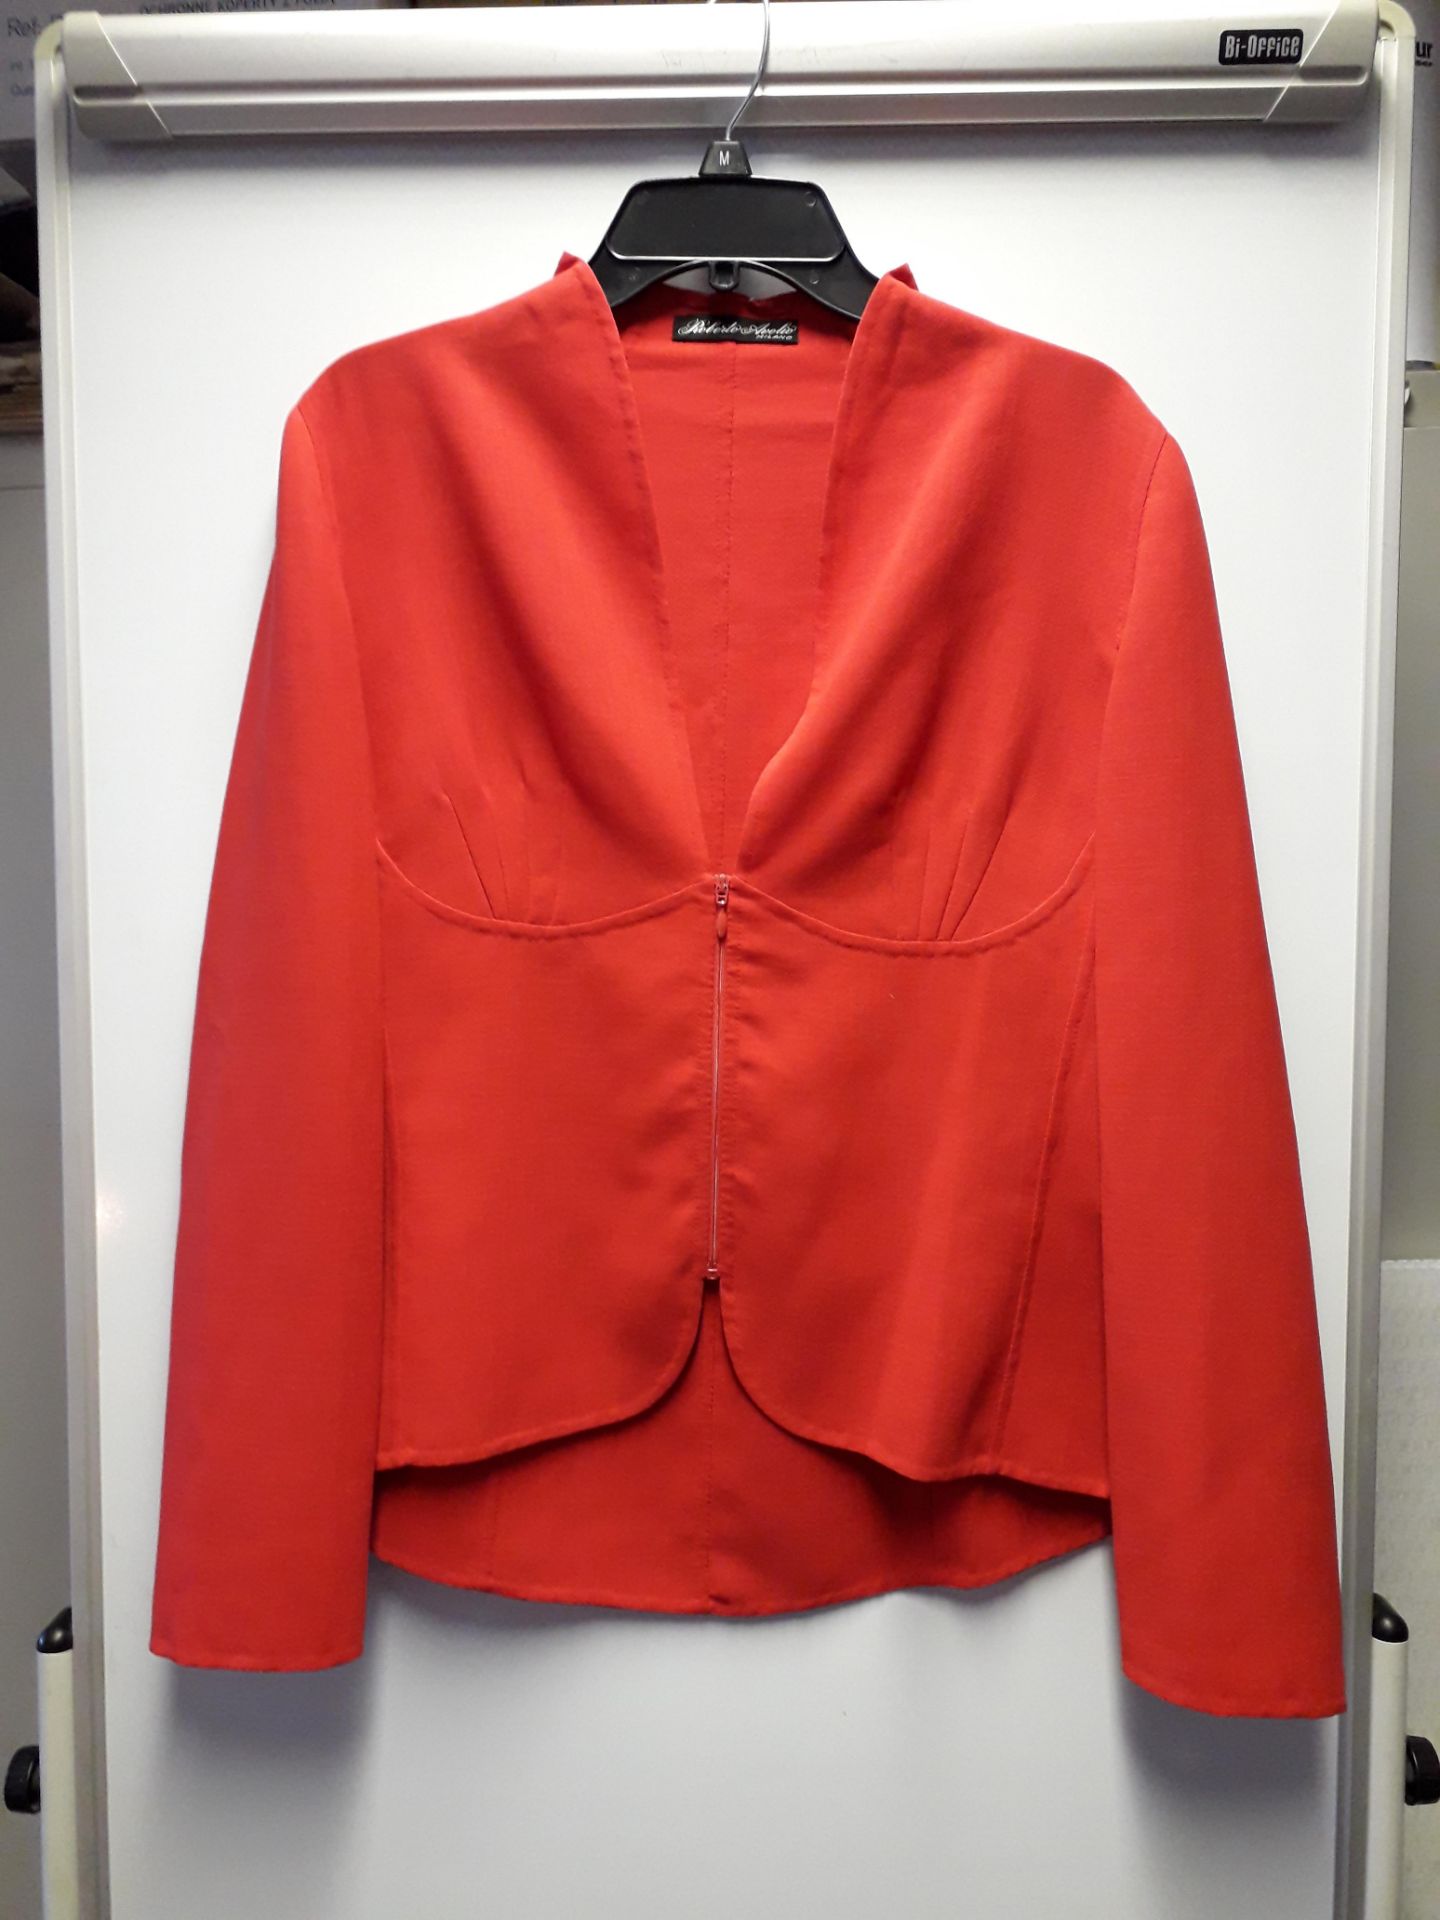 1 x Roberto Avolio Red Fitted Blazer - Size: 14 - Material: 100% Virgin Wool - From a High End - Image 2 of 5